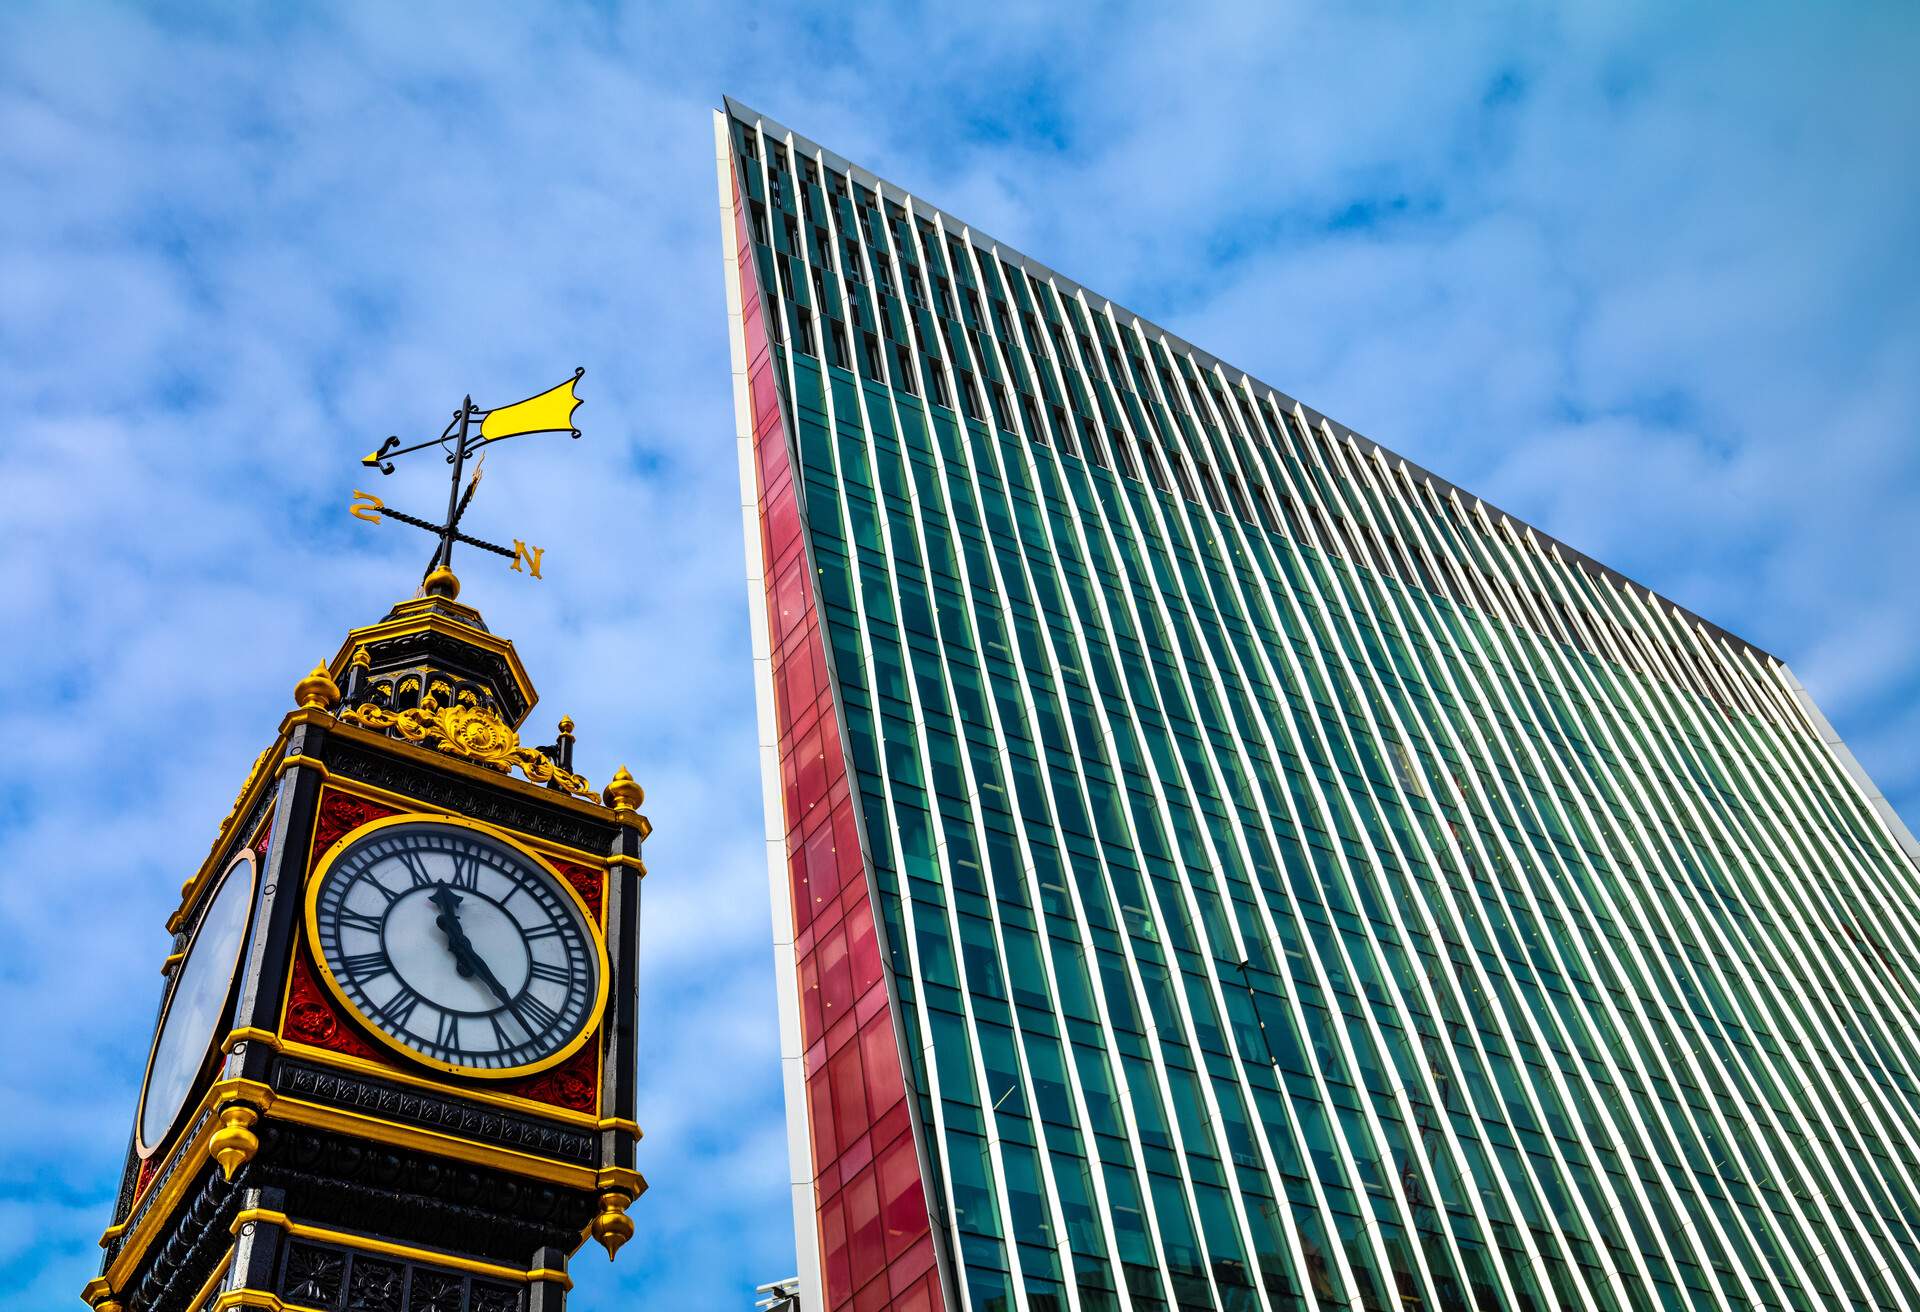 Little Ben clock next to the Nova Building, Victoria, London, UK. Little Ben was erected in 1892, and the Nova Building was voted London's ugliest building in 2017 when it was awarded the 